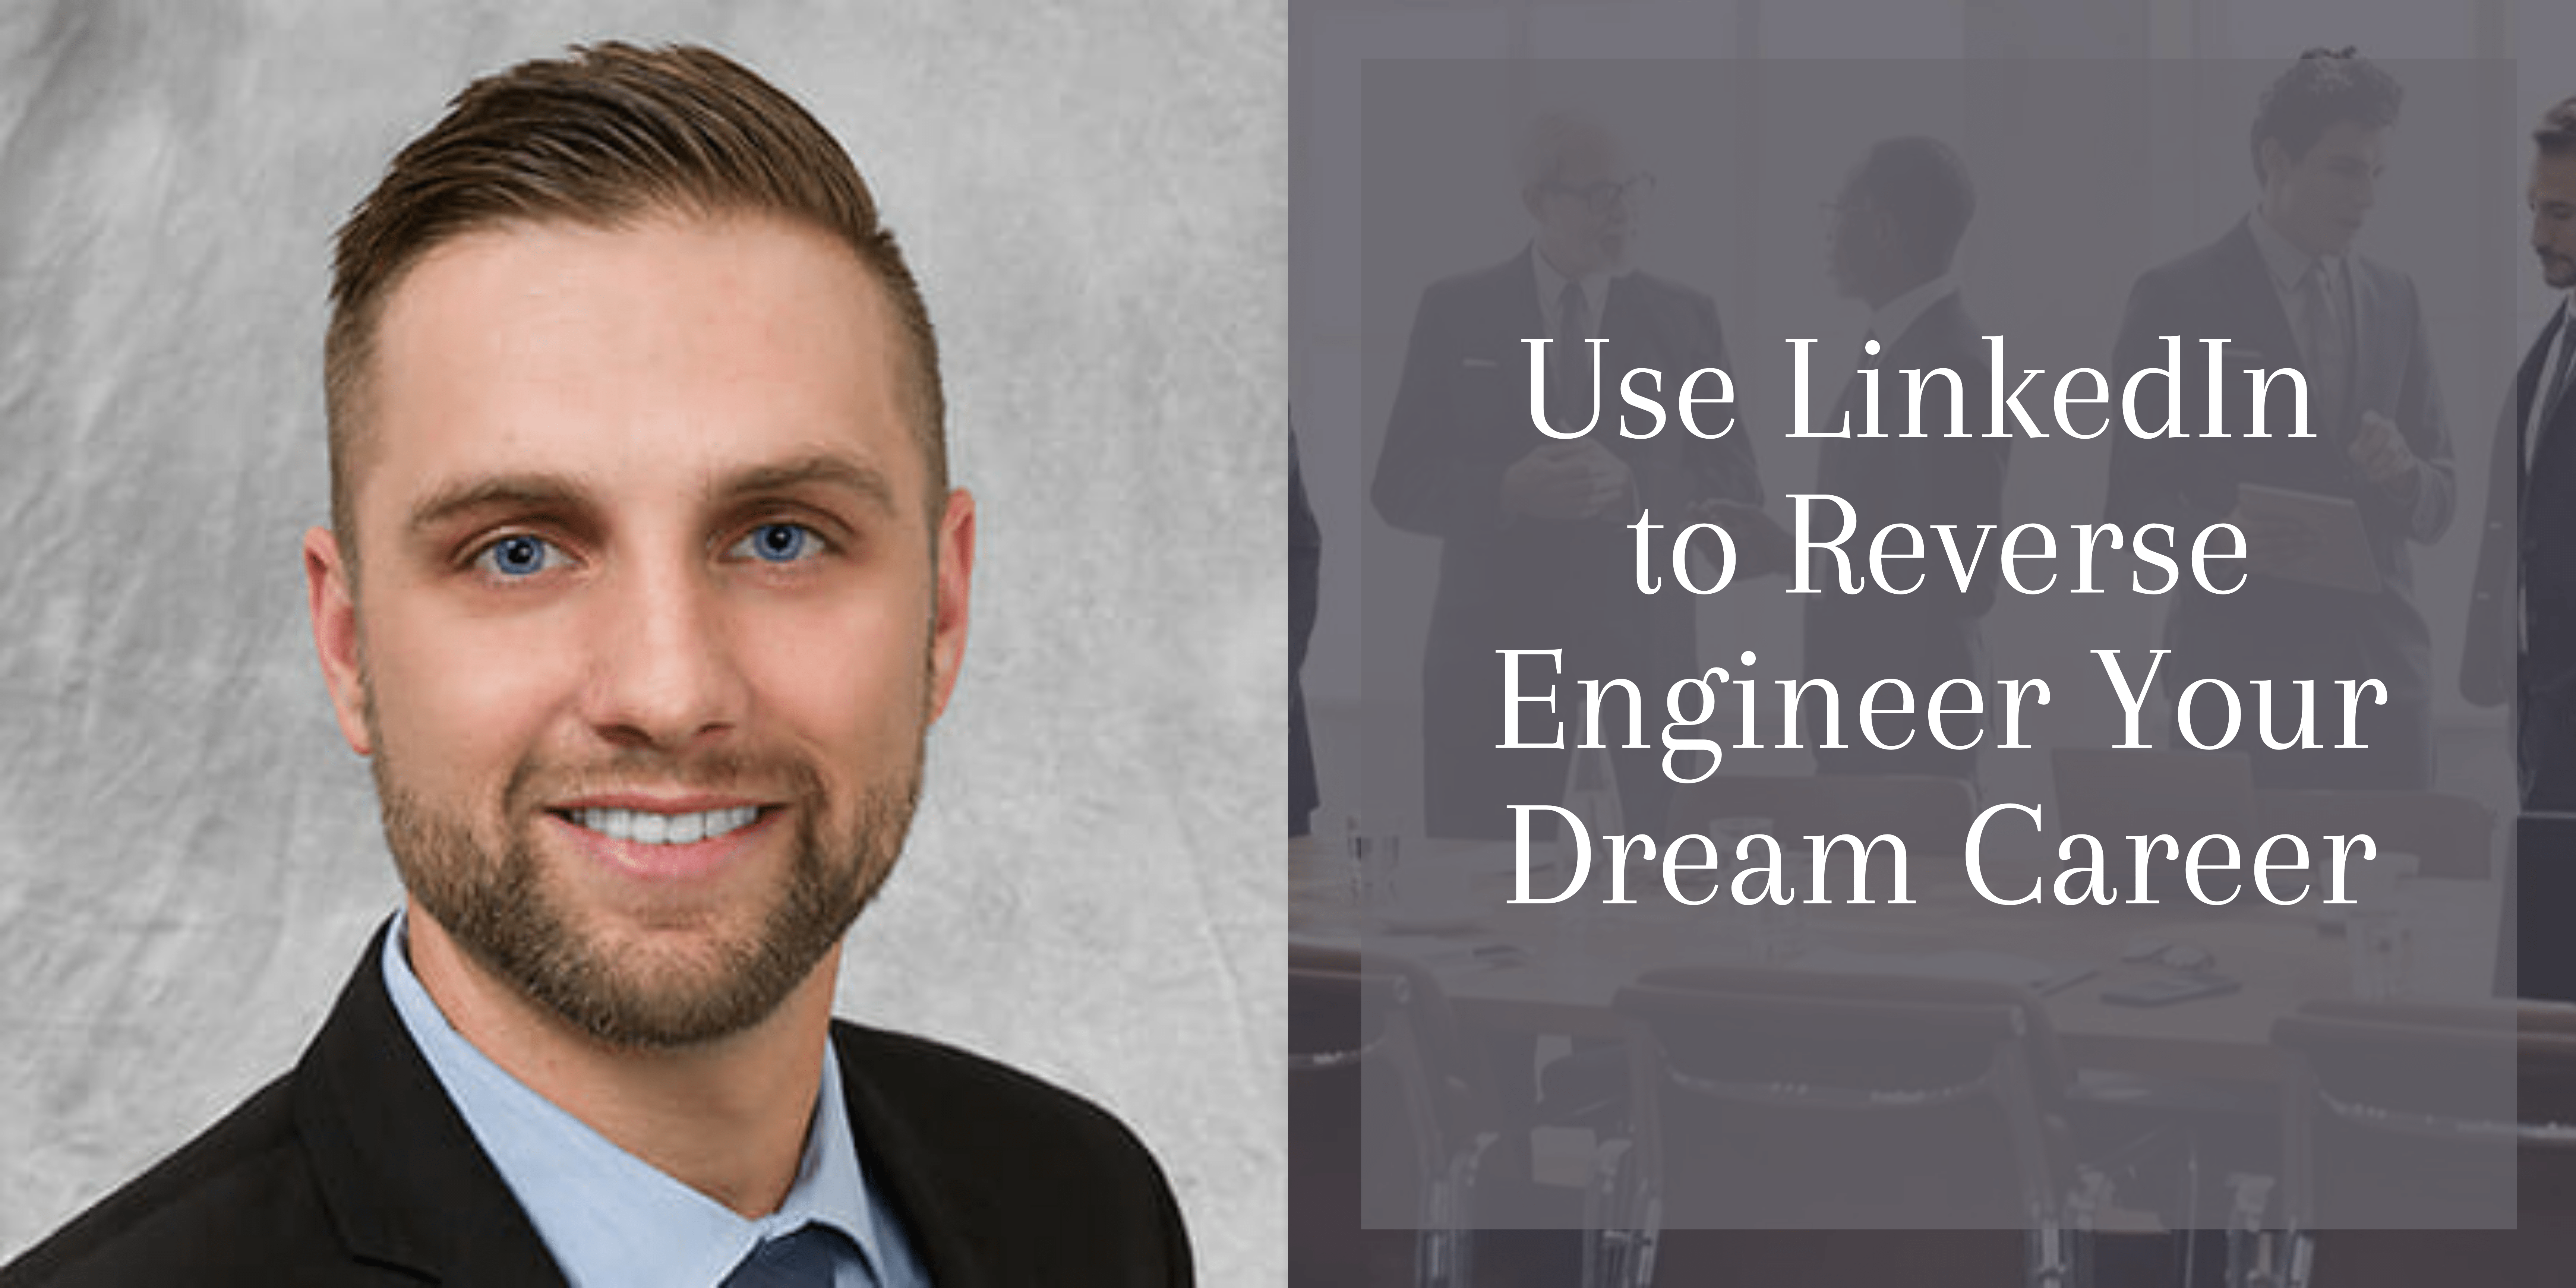 Use LinkedIn to Reverse Engineer Your Dream Career